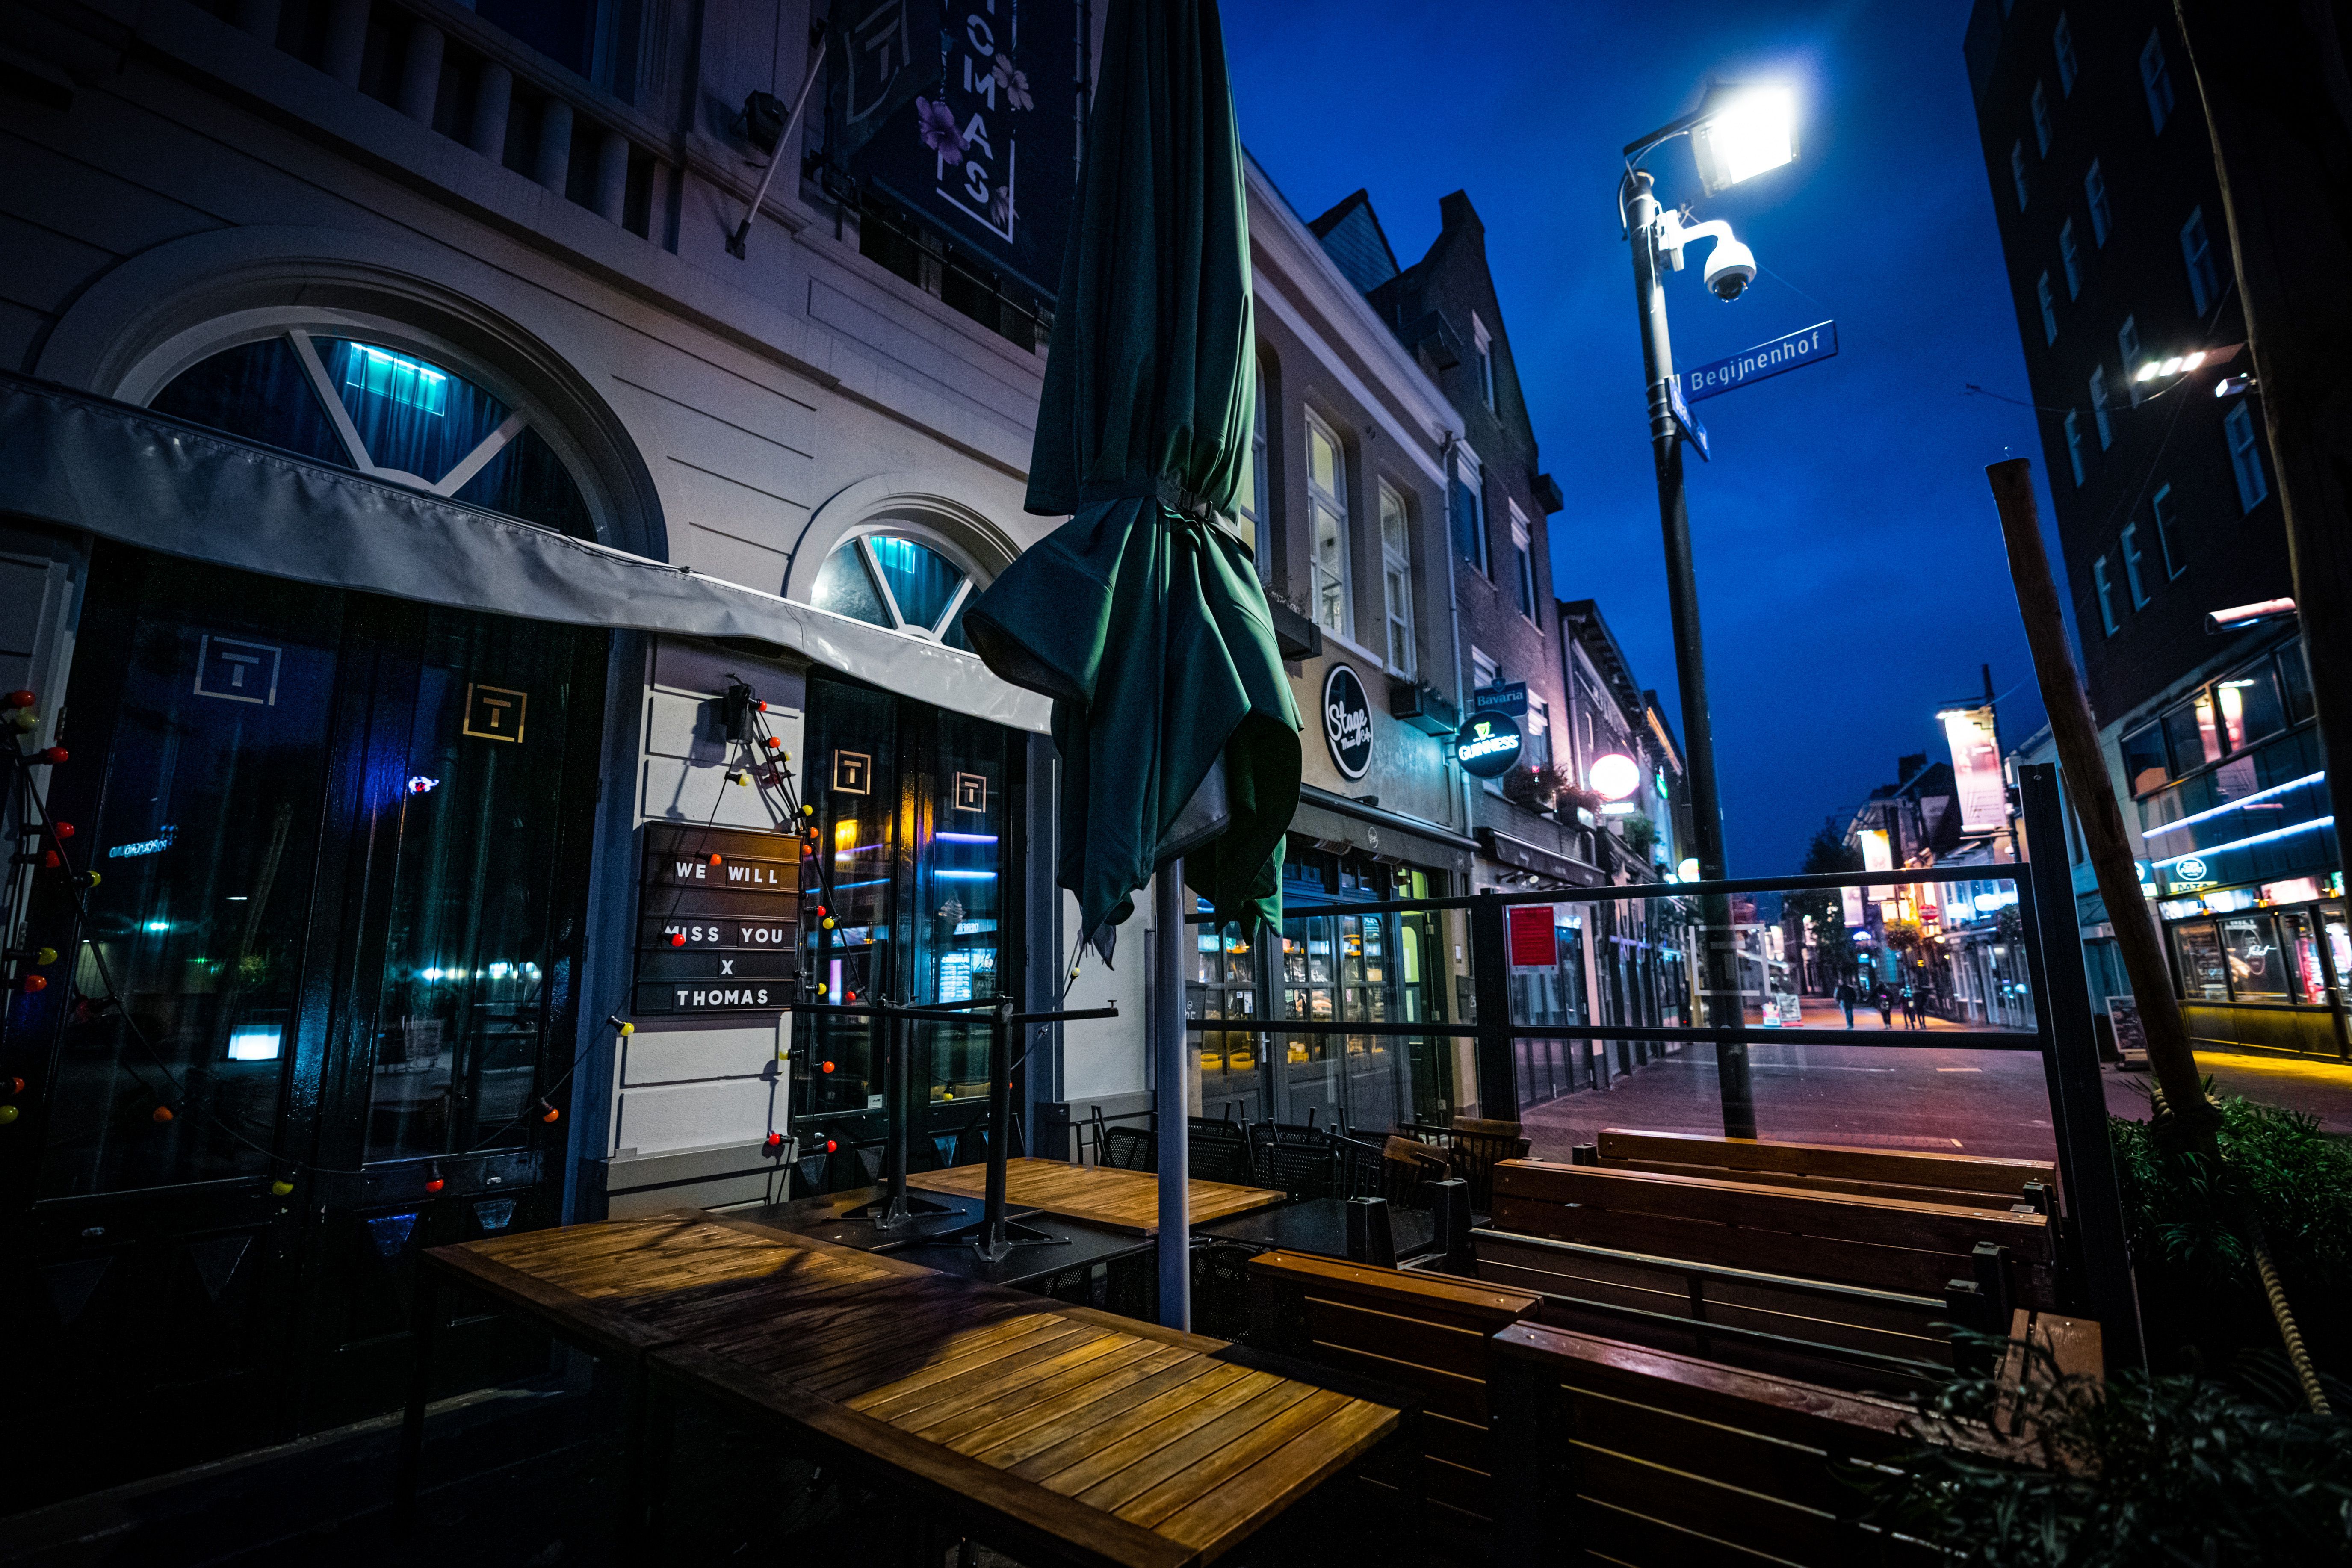 A photograph taken on October 17, 2020 shows a closed bar in Eindhoven